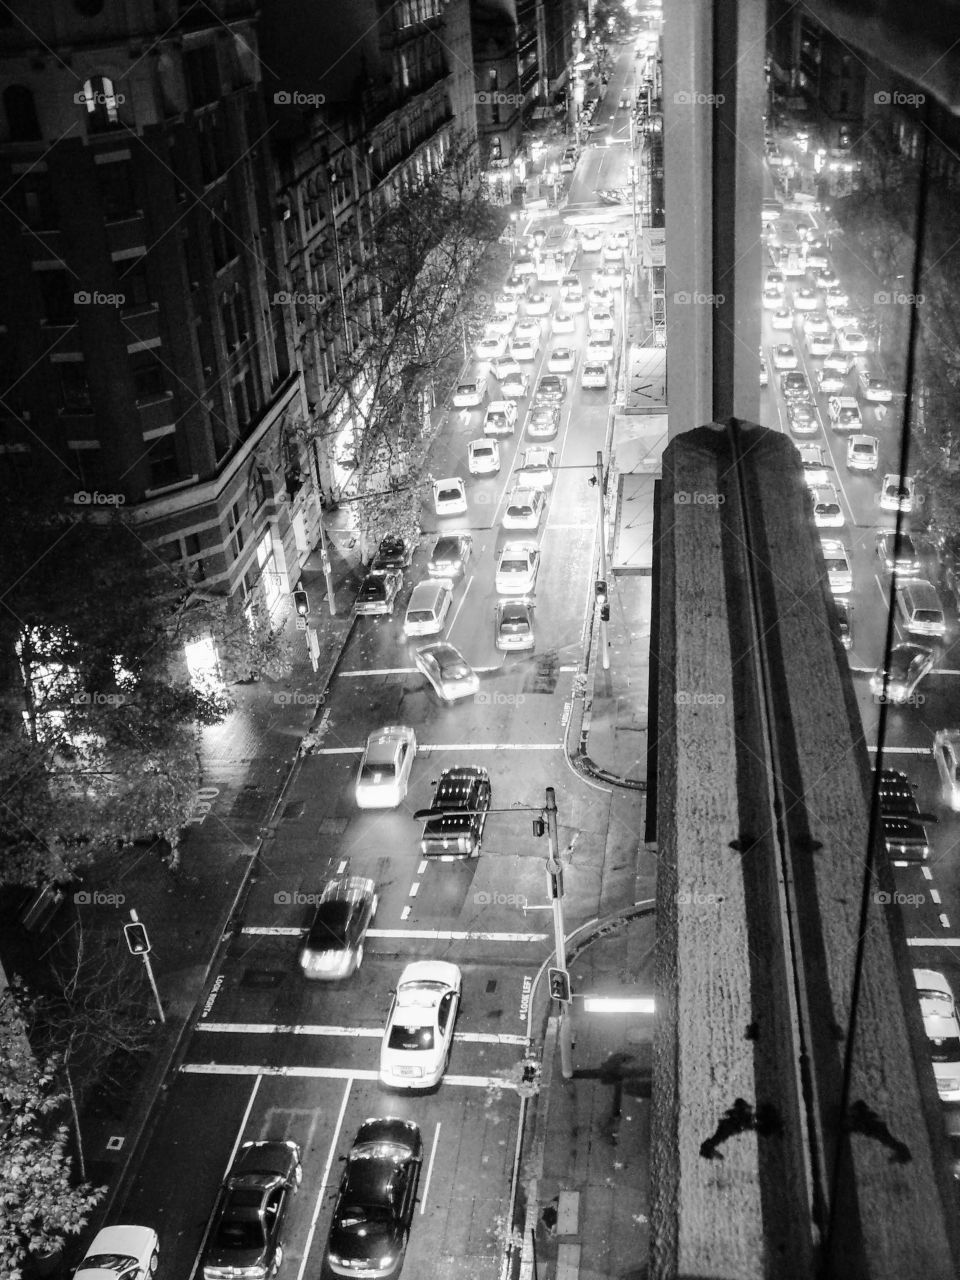 Evening view from Trevors appartments in Sydney CBD. In black and white